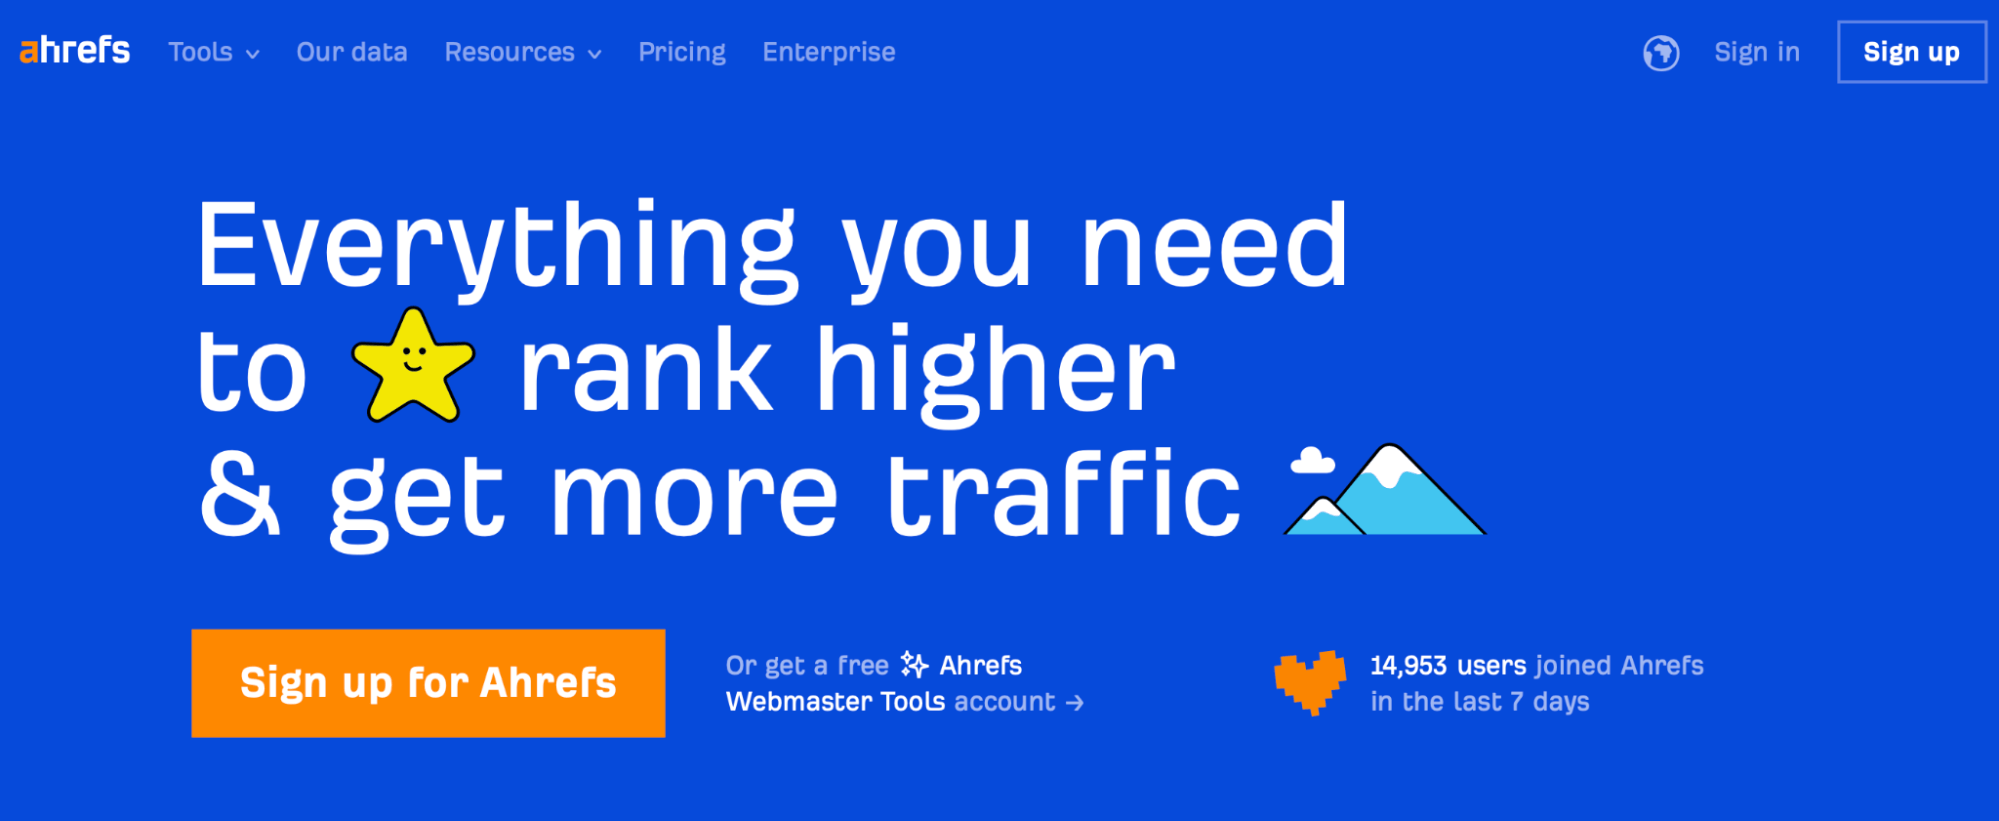 Ahrefs homepage: Everything you need to rank higher and get more traffic. 